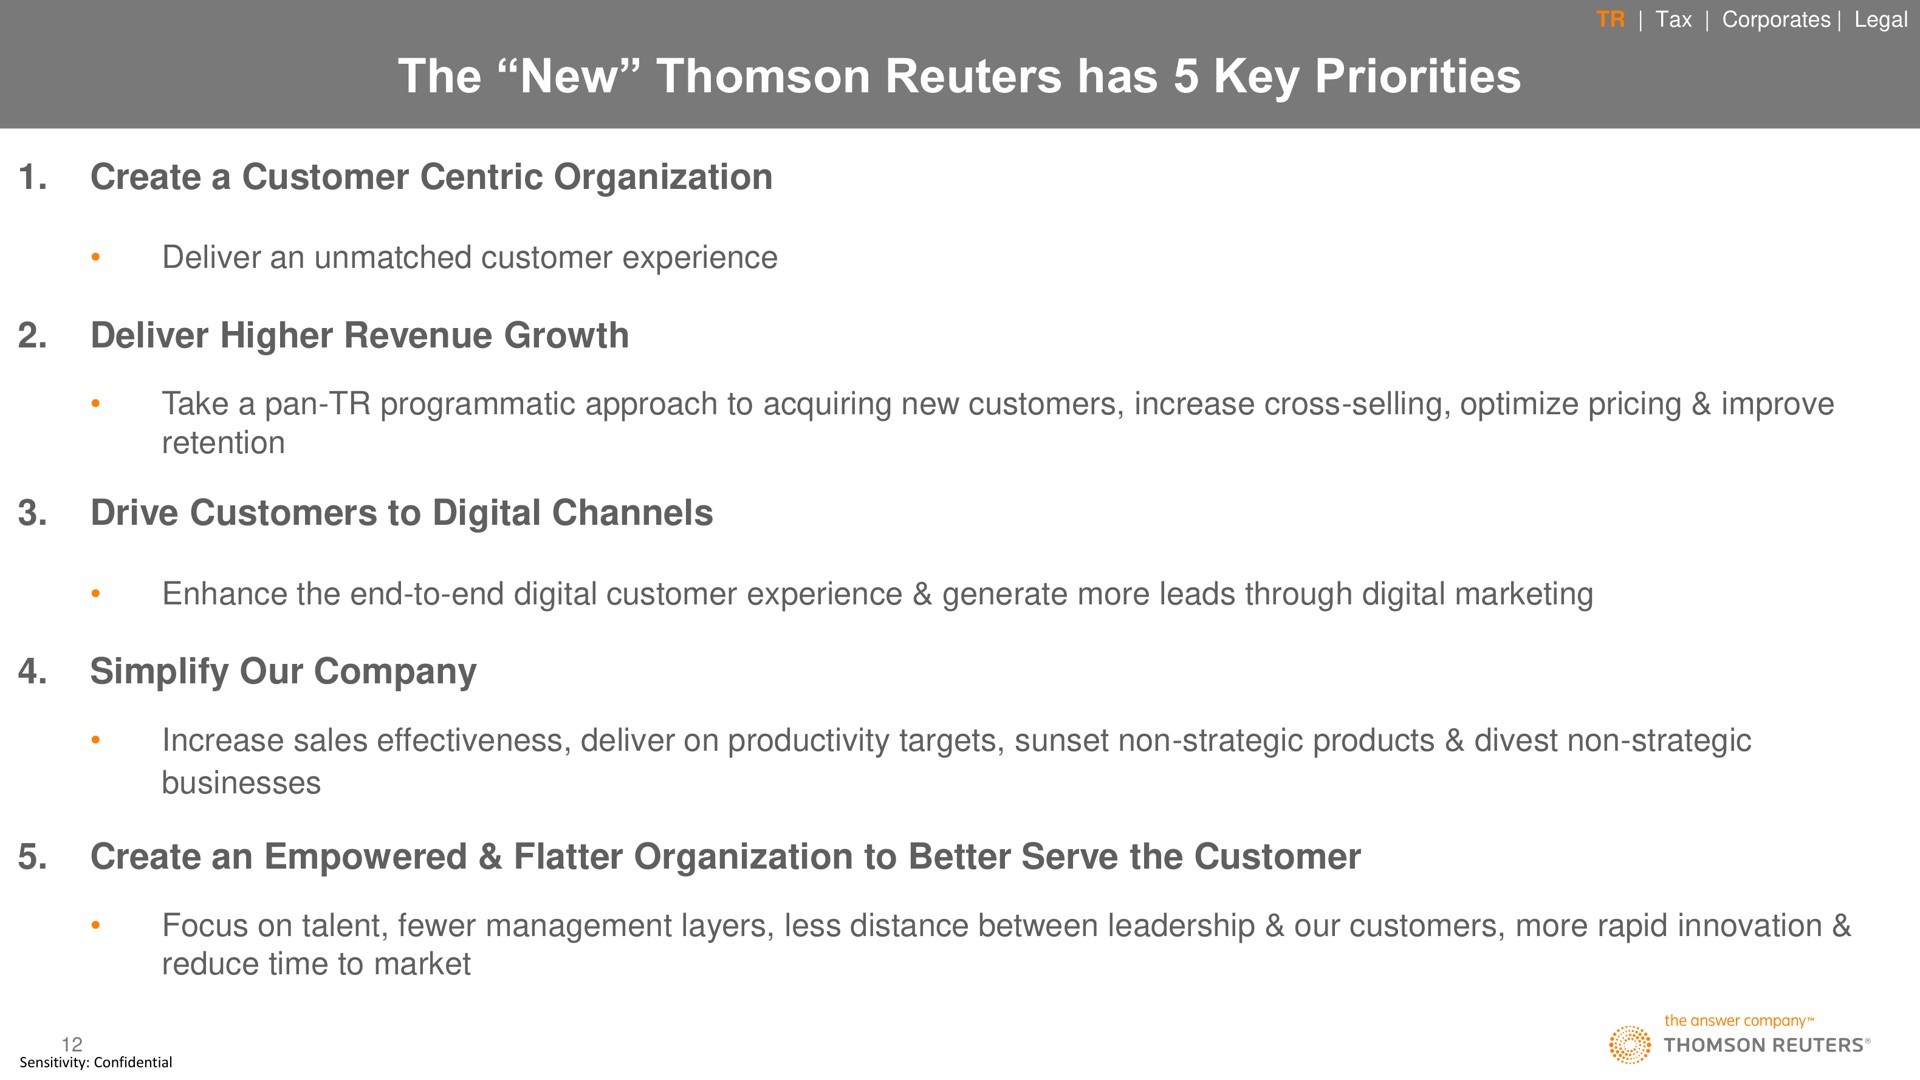 the new has key priorities | Thomson Reuters